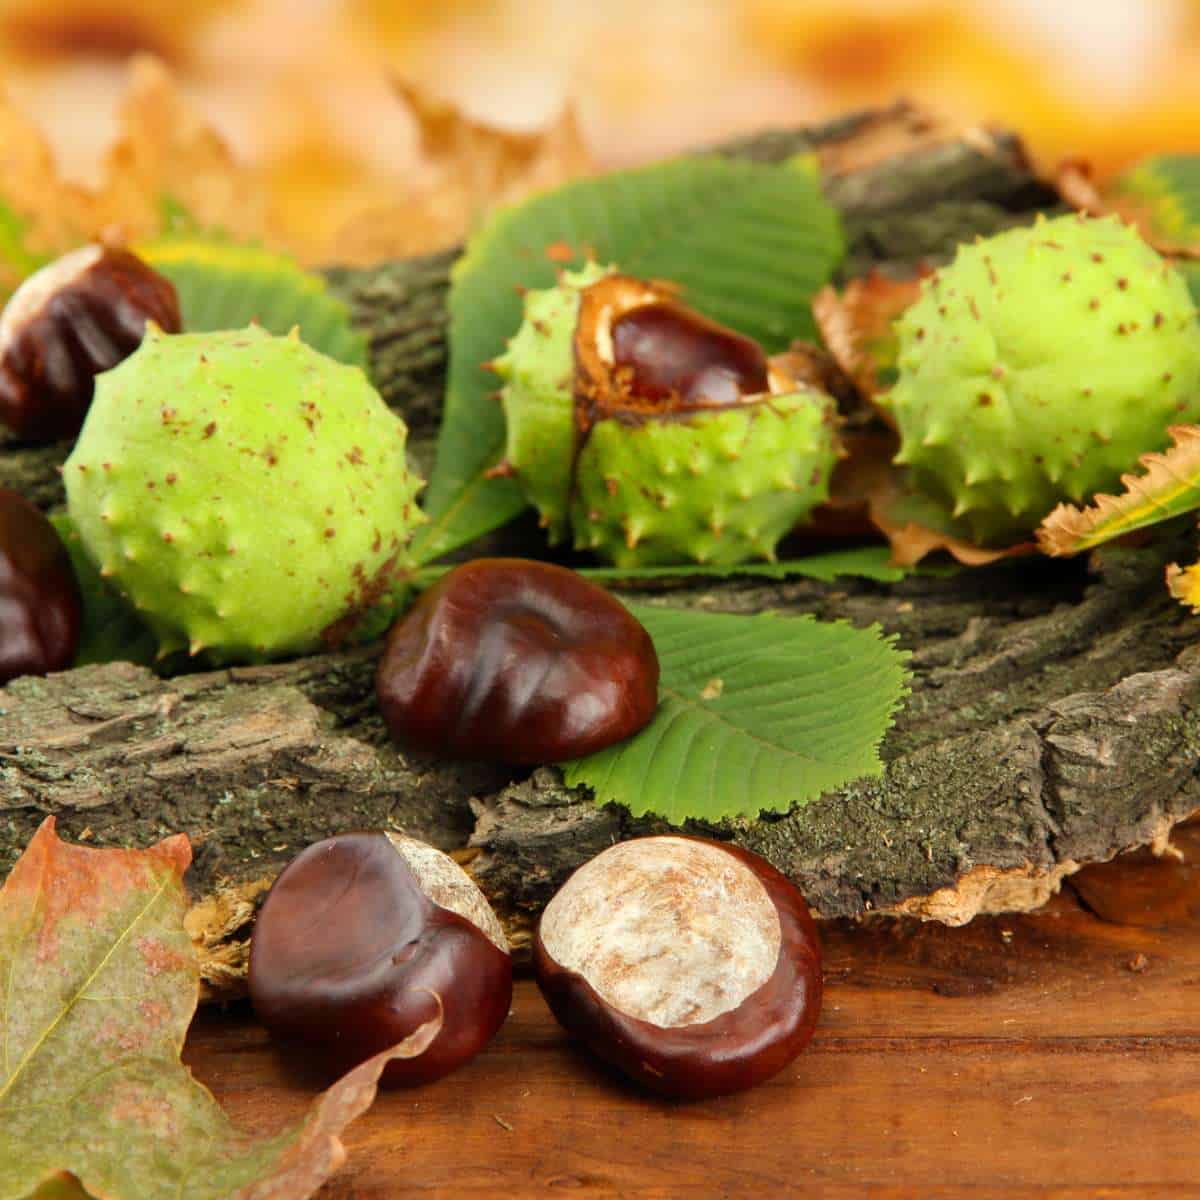 Chestnuts and leaves, symbols of autumn abundance, beautifully arranged on a rustic wooden table.